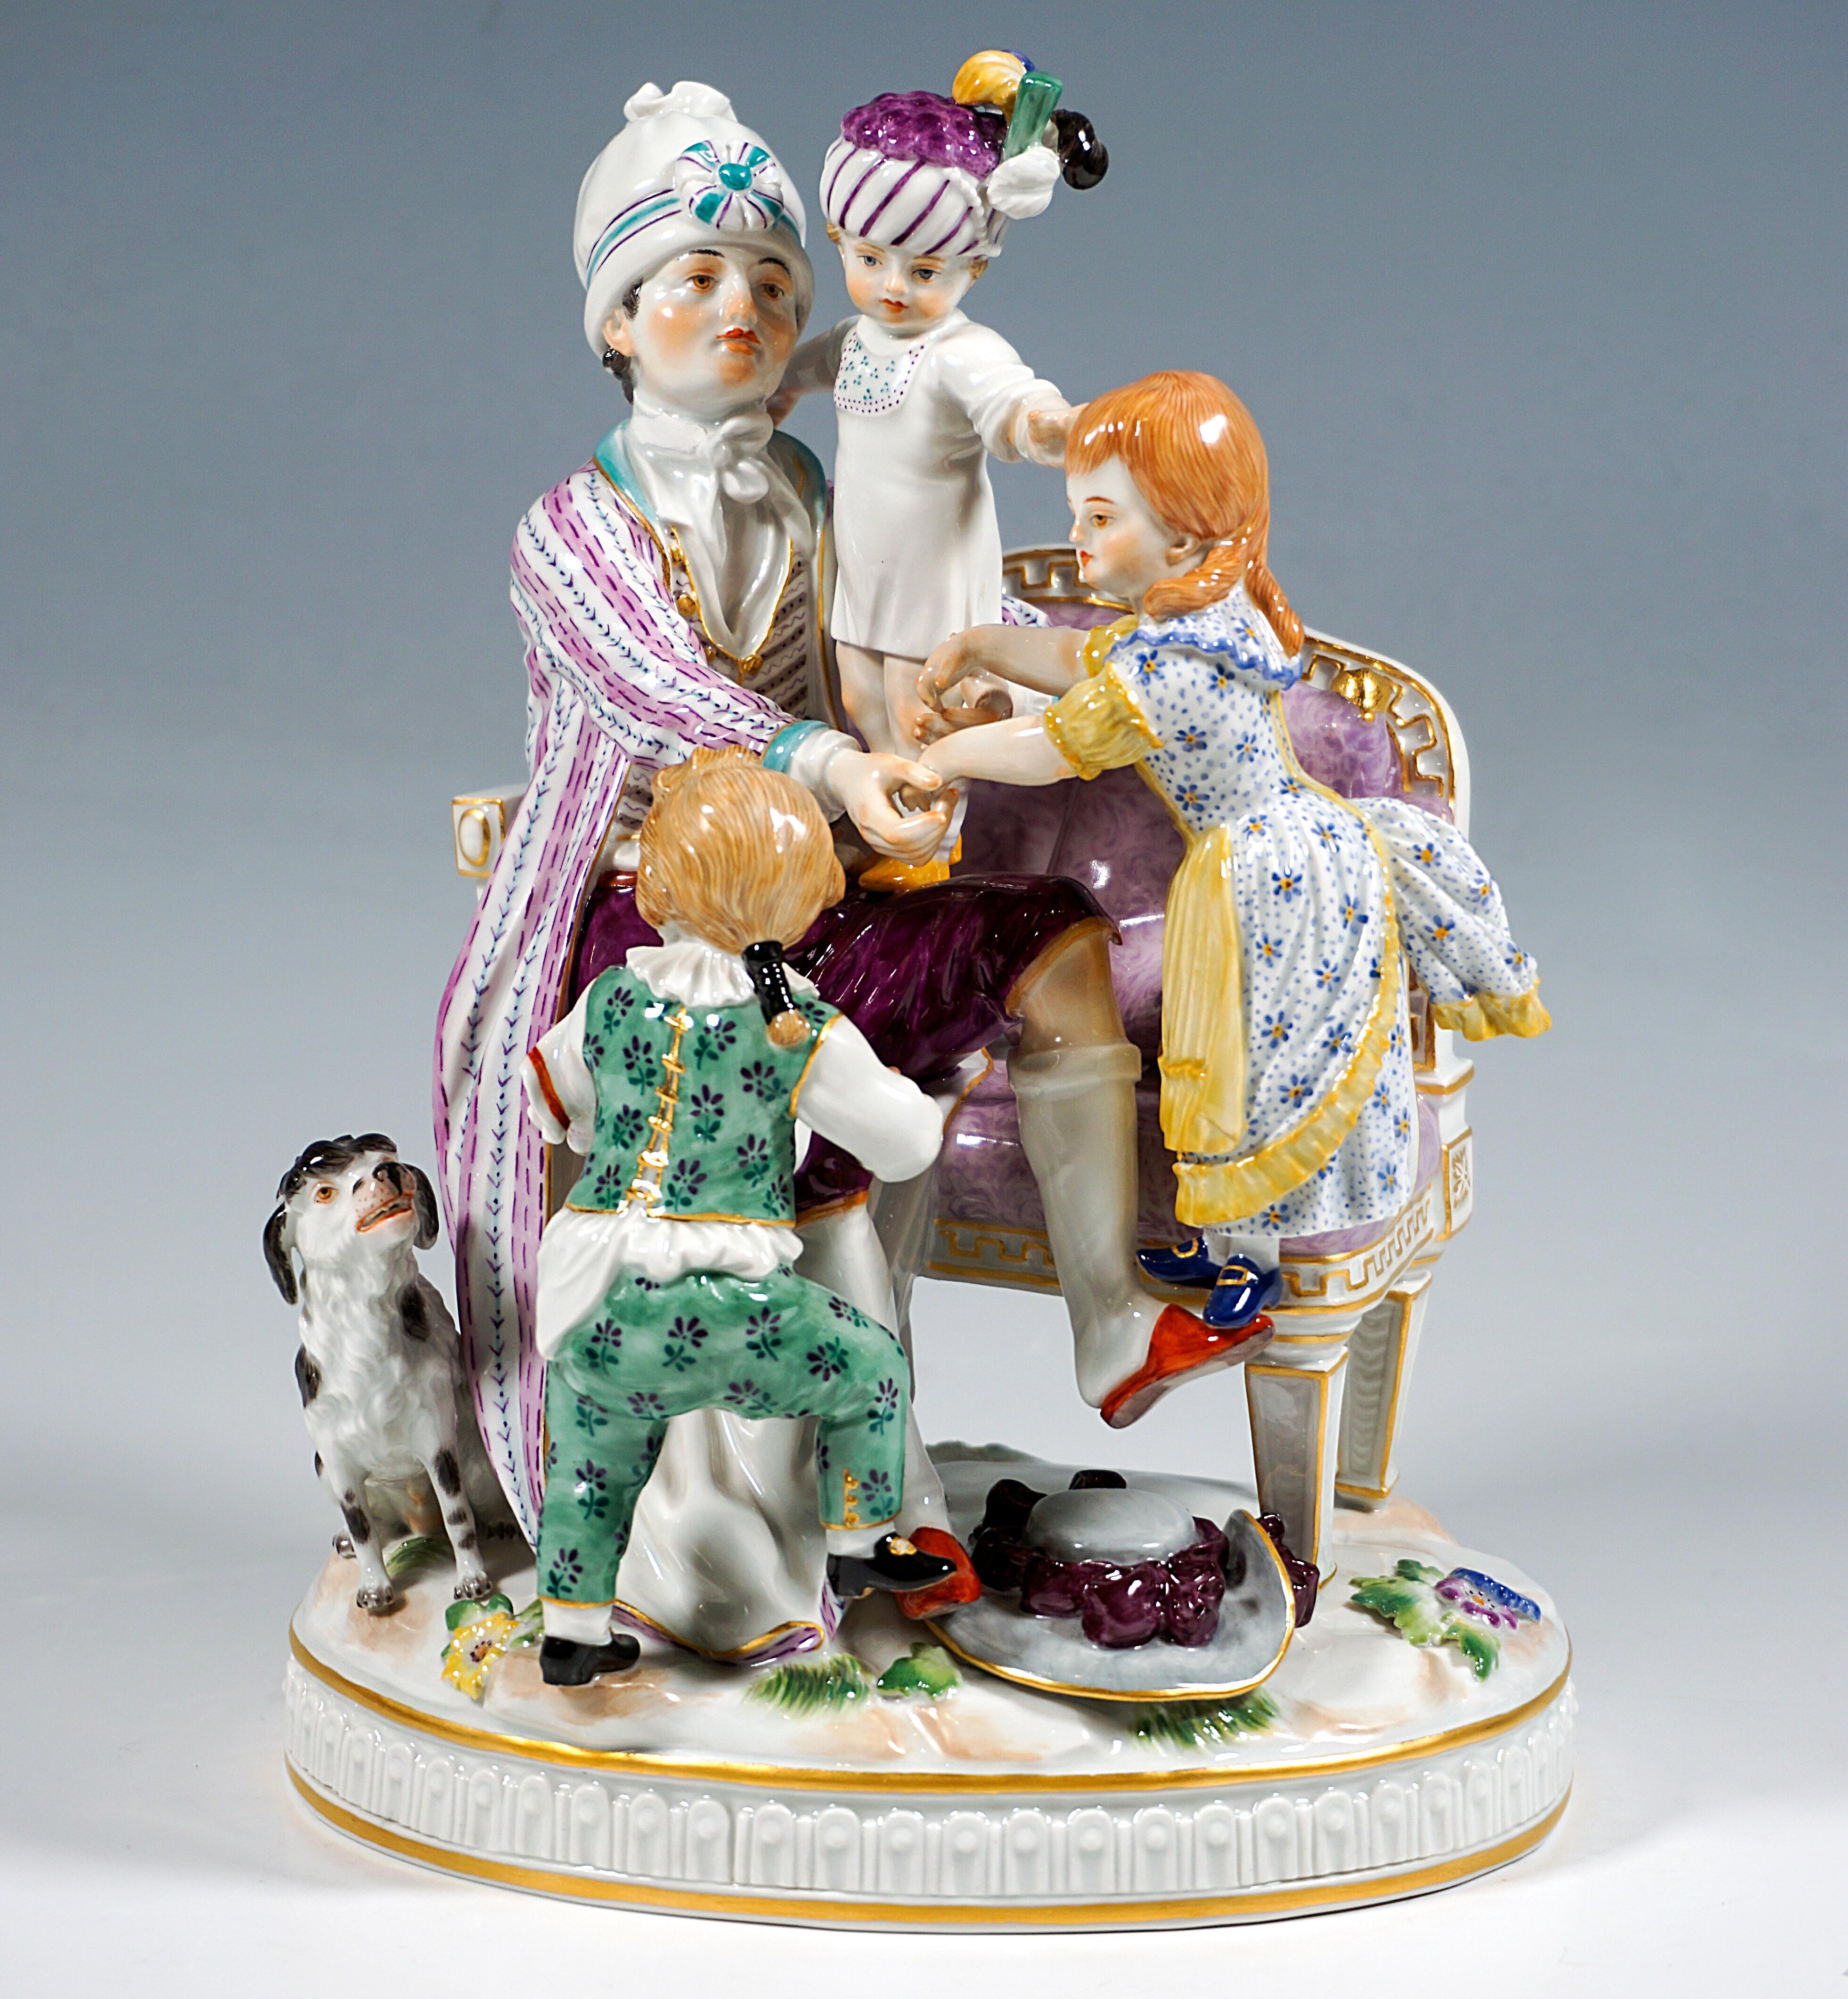 Excellent Meissen porcelain genre group:
The father in domestic garb (housecoat over elaborate house clothes, slippers, high cap) sitting on a cushioned bench and busy supervising his three children: A small boy in a white shirt and turban adorned